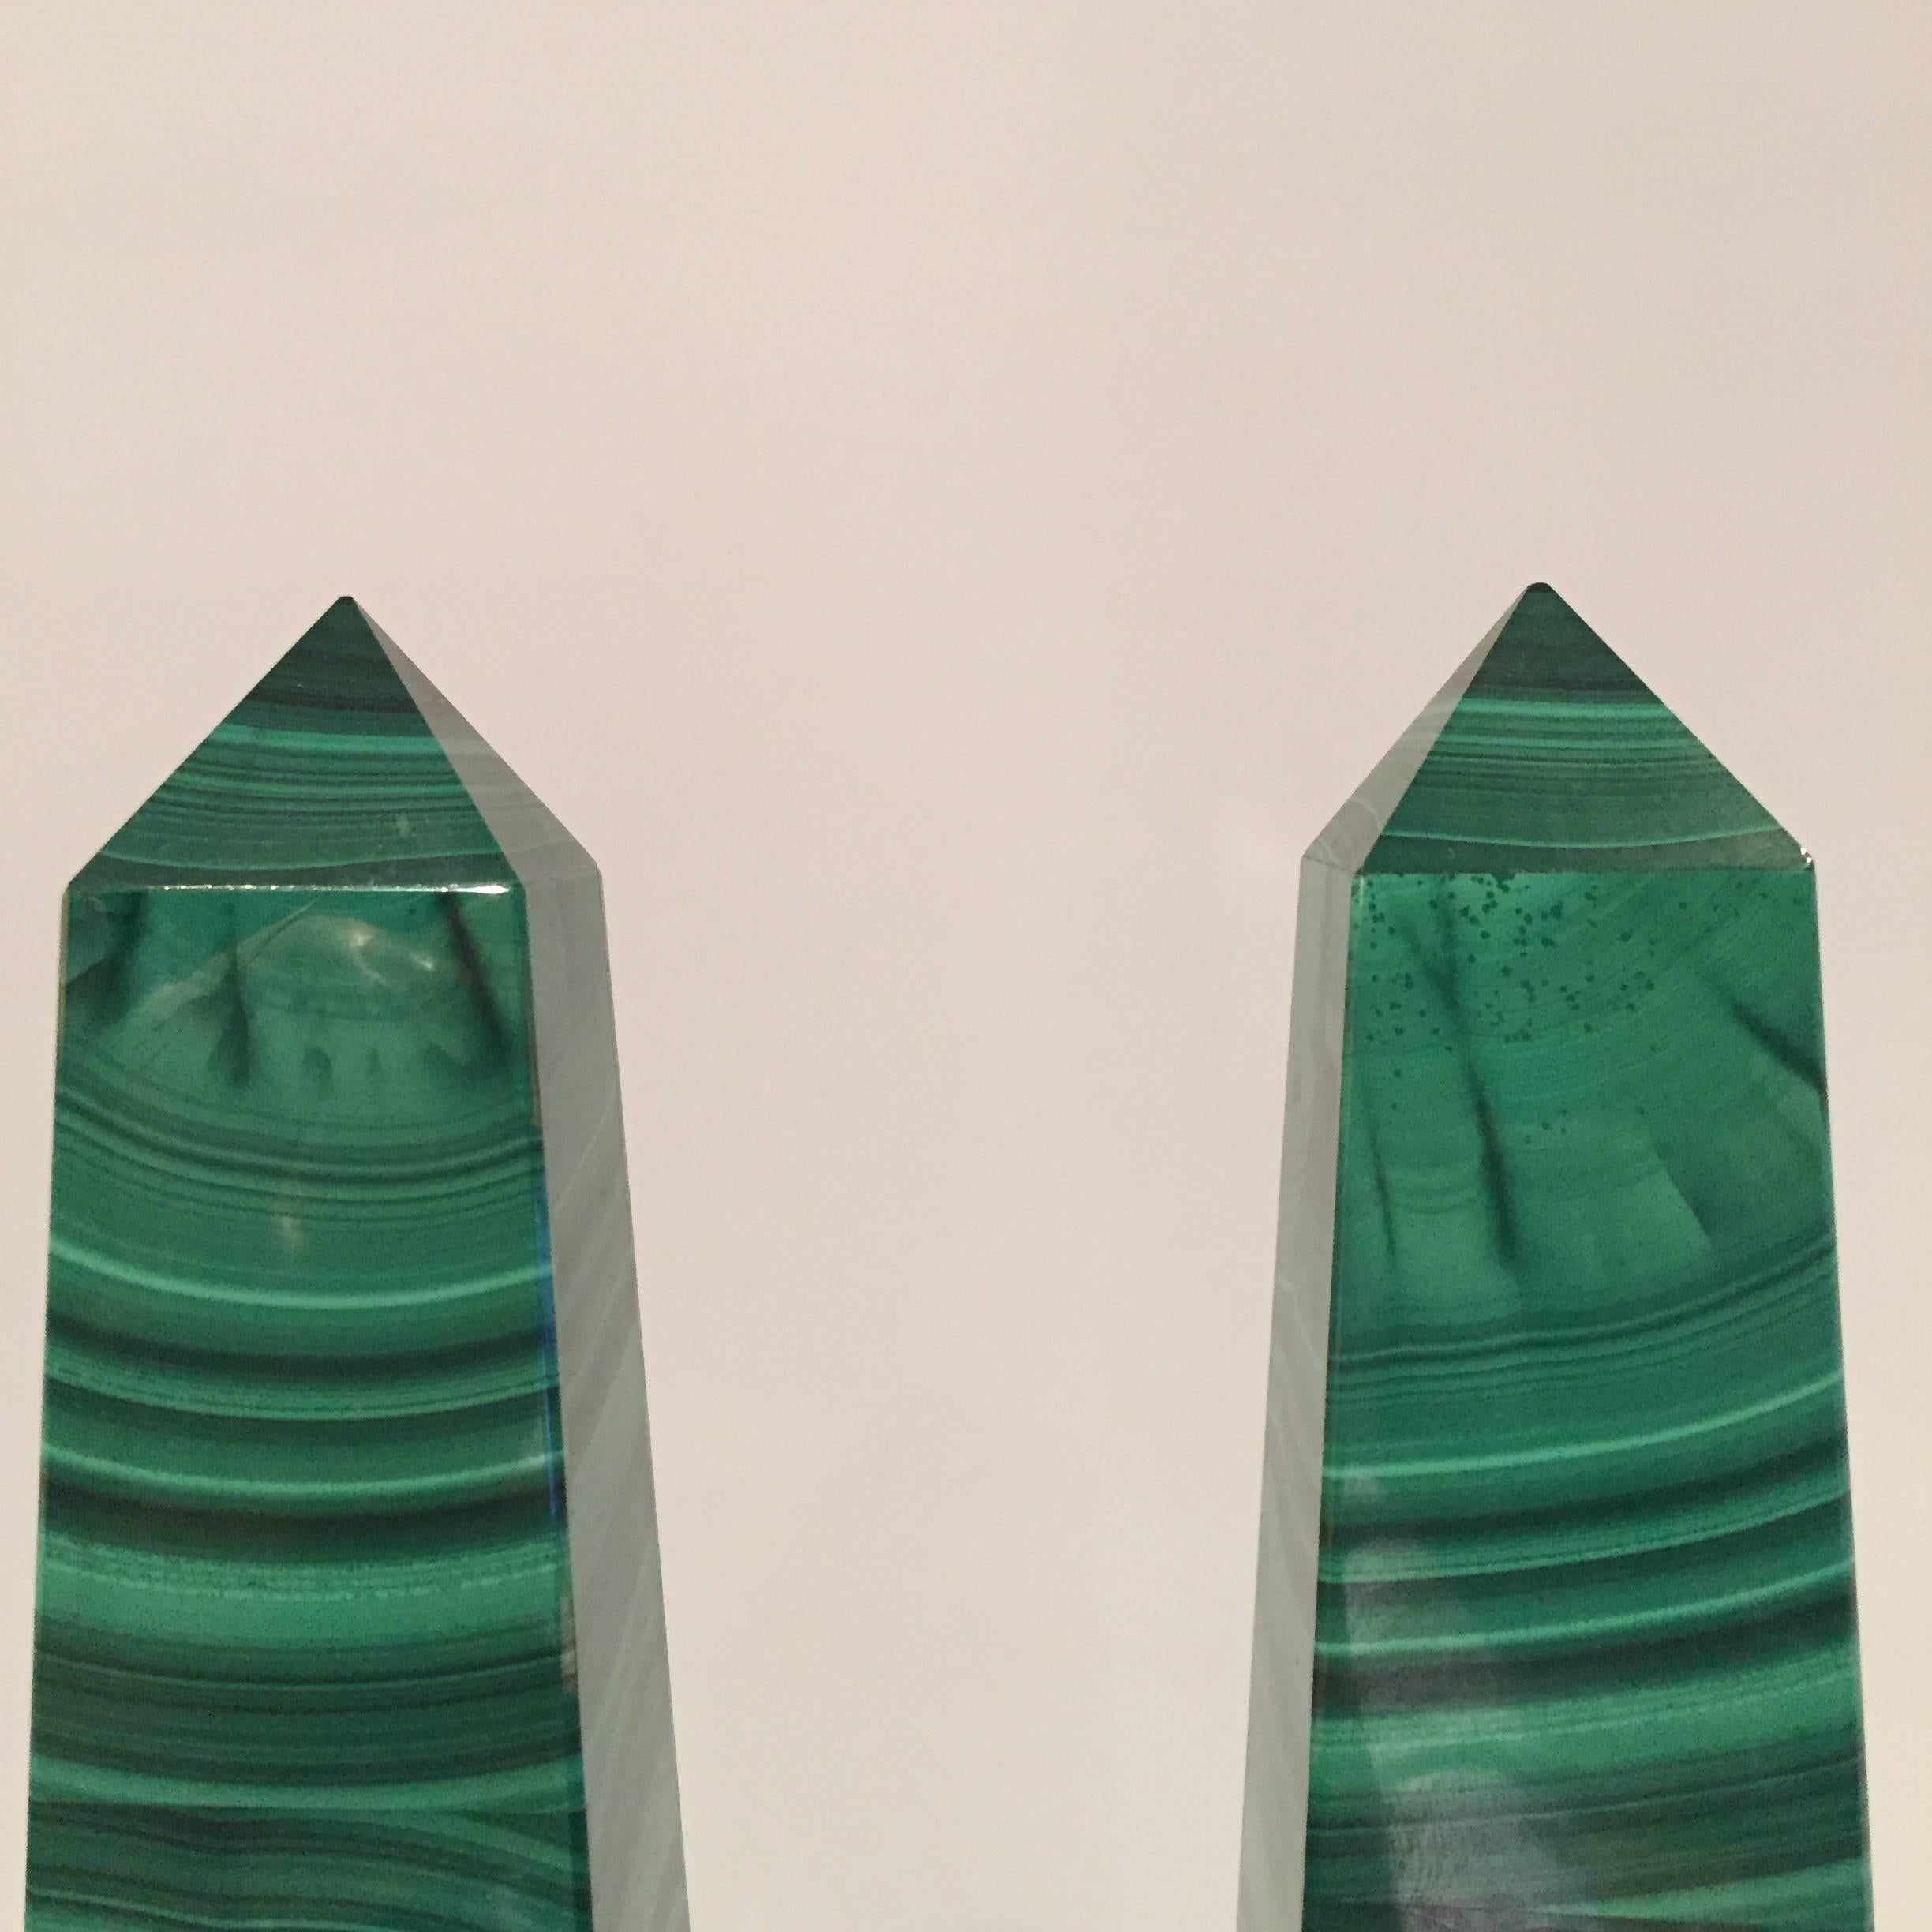 Beautiful pair of Italian Malachite and Obsidian Obelisks- It is rare to find such high quality malachite showcasing the beautiful banding and striations of the natural stone.  Obelisks were always an important object brought back by travelers on